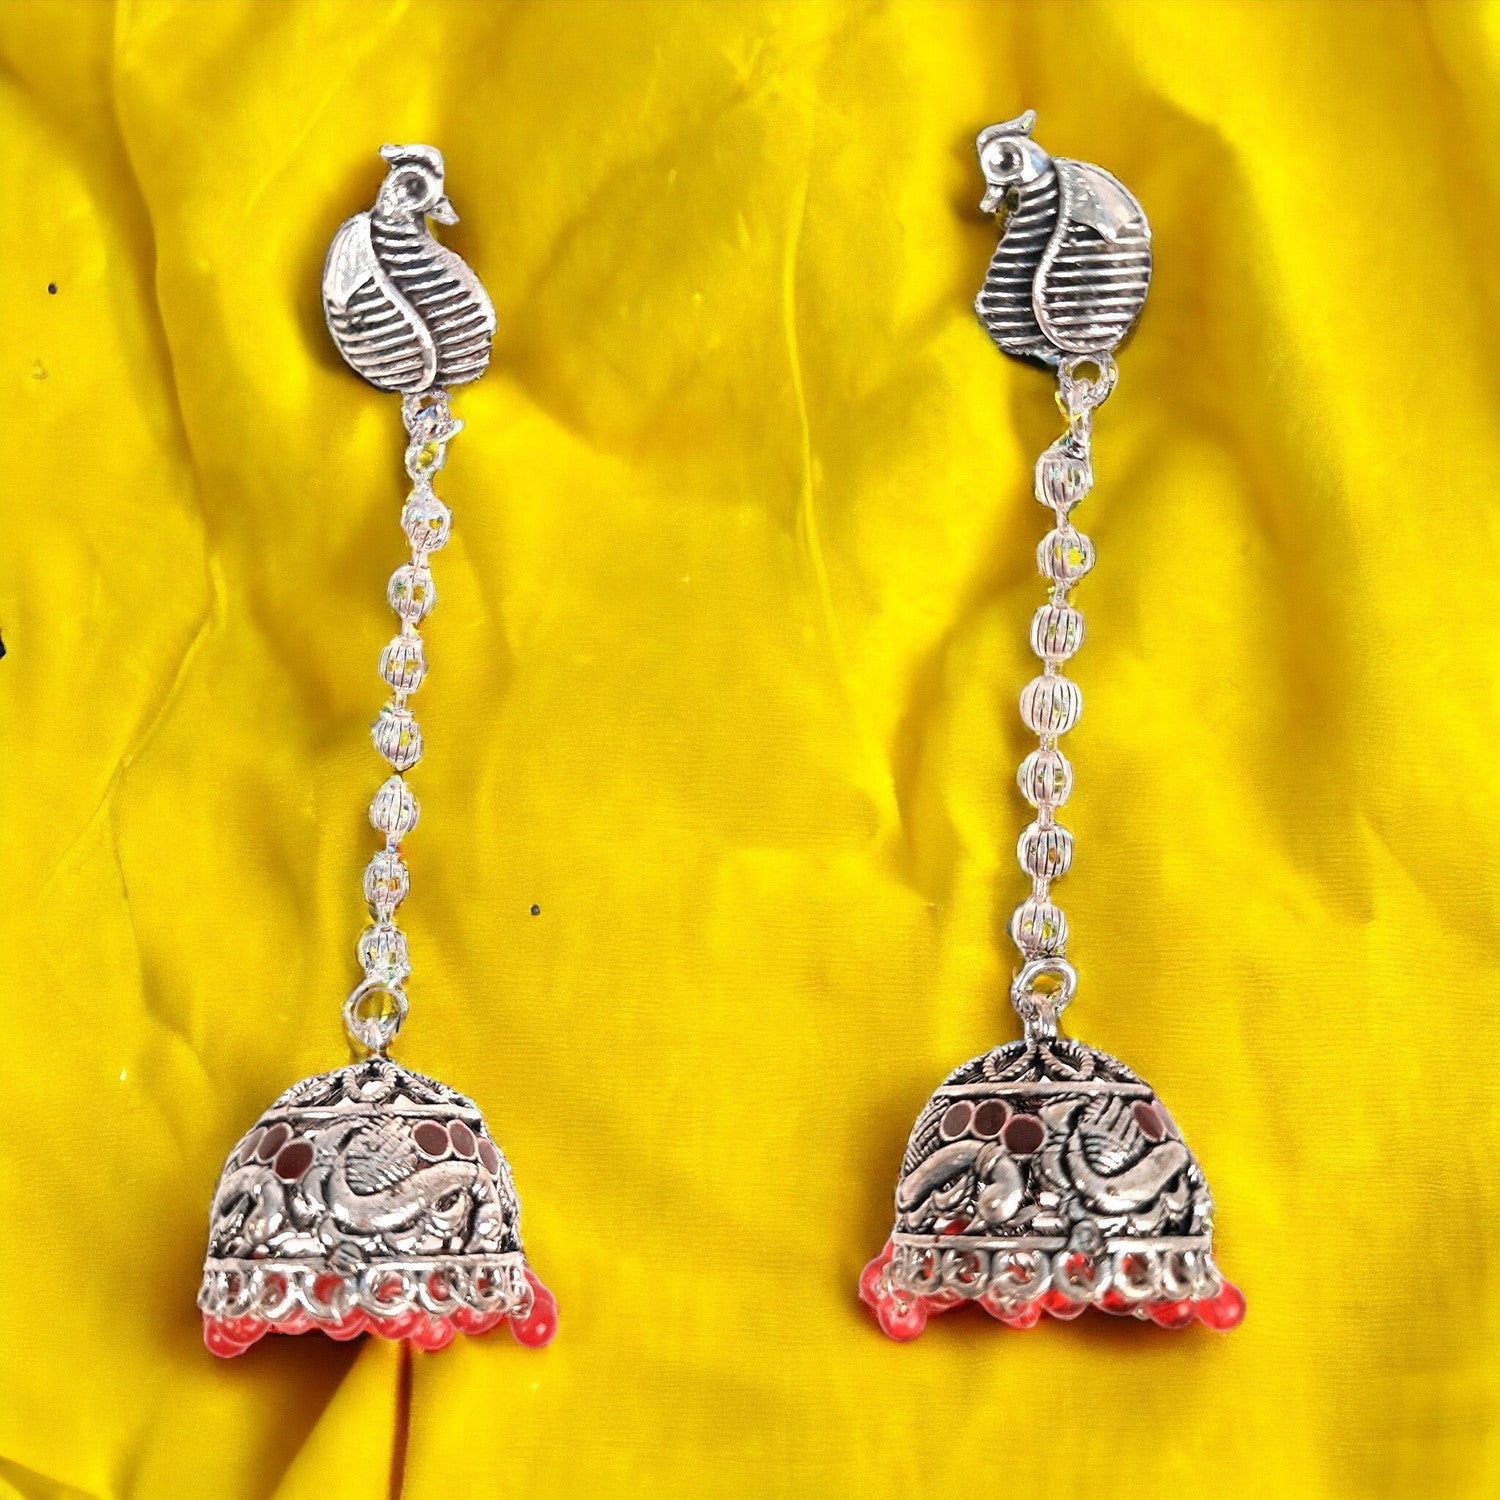 Jhumka Earrings for Girls & Women Jewellery - Peacock Design Jhumki I Oxidised Silver Plated Earring | Gifts for Her, Friendship Day, Valentine's Day Gift - Apkamart